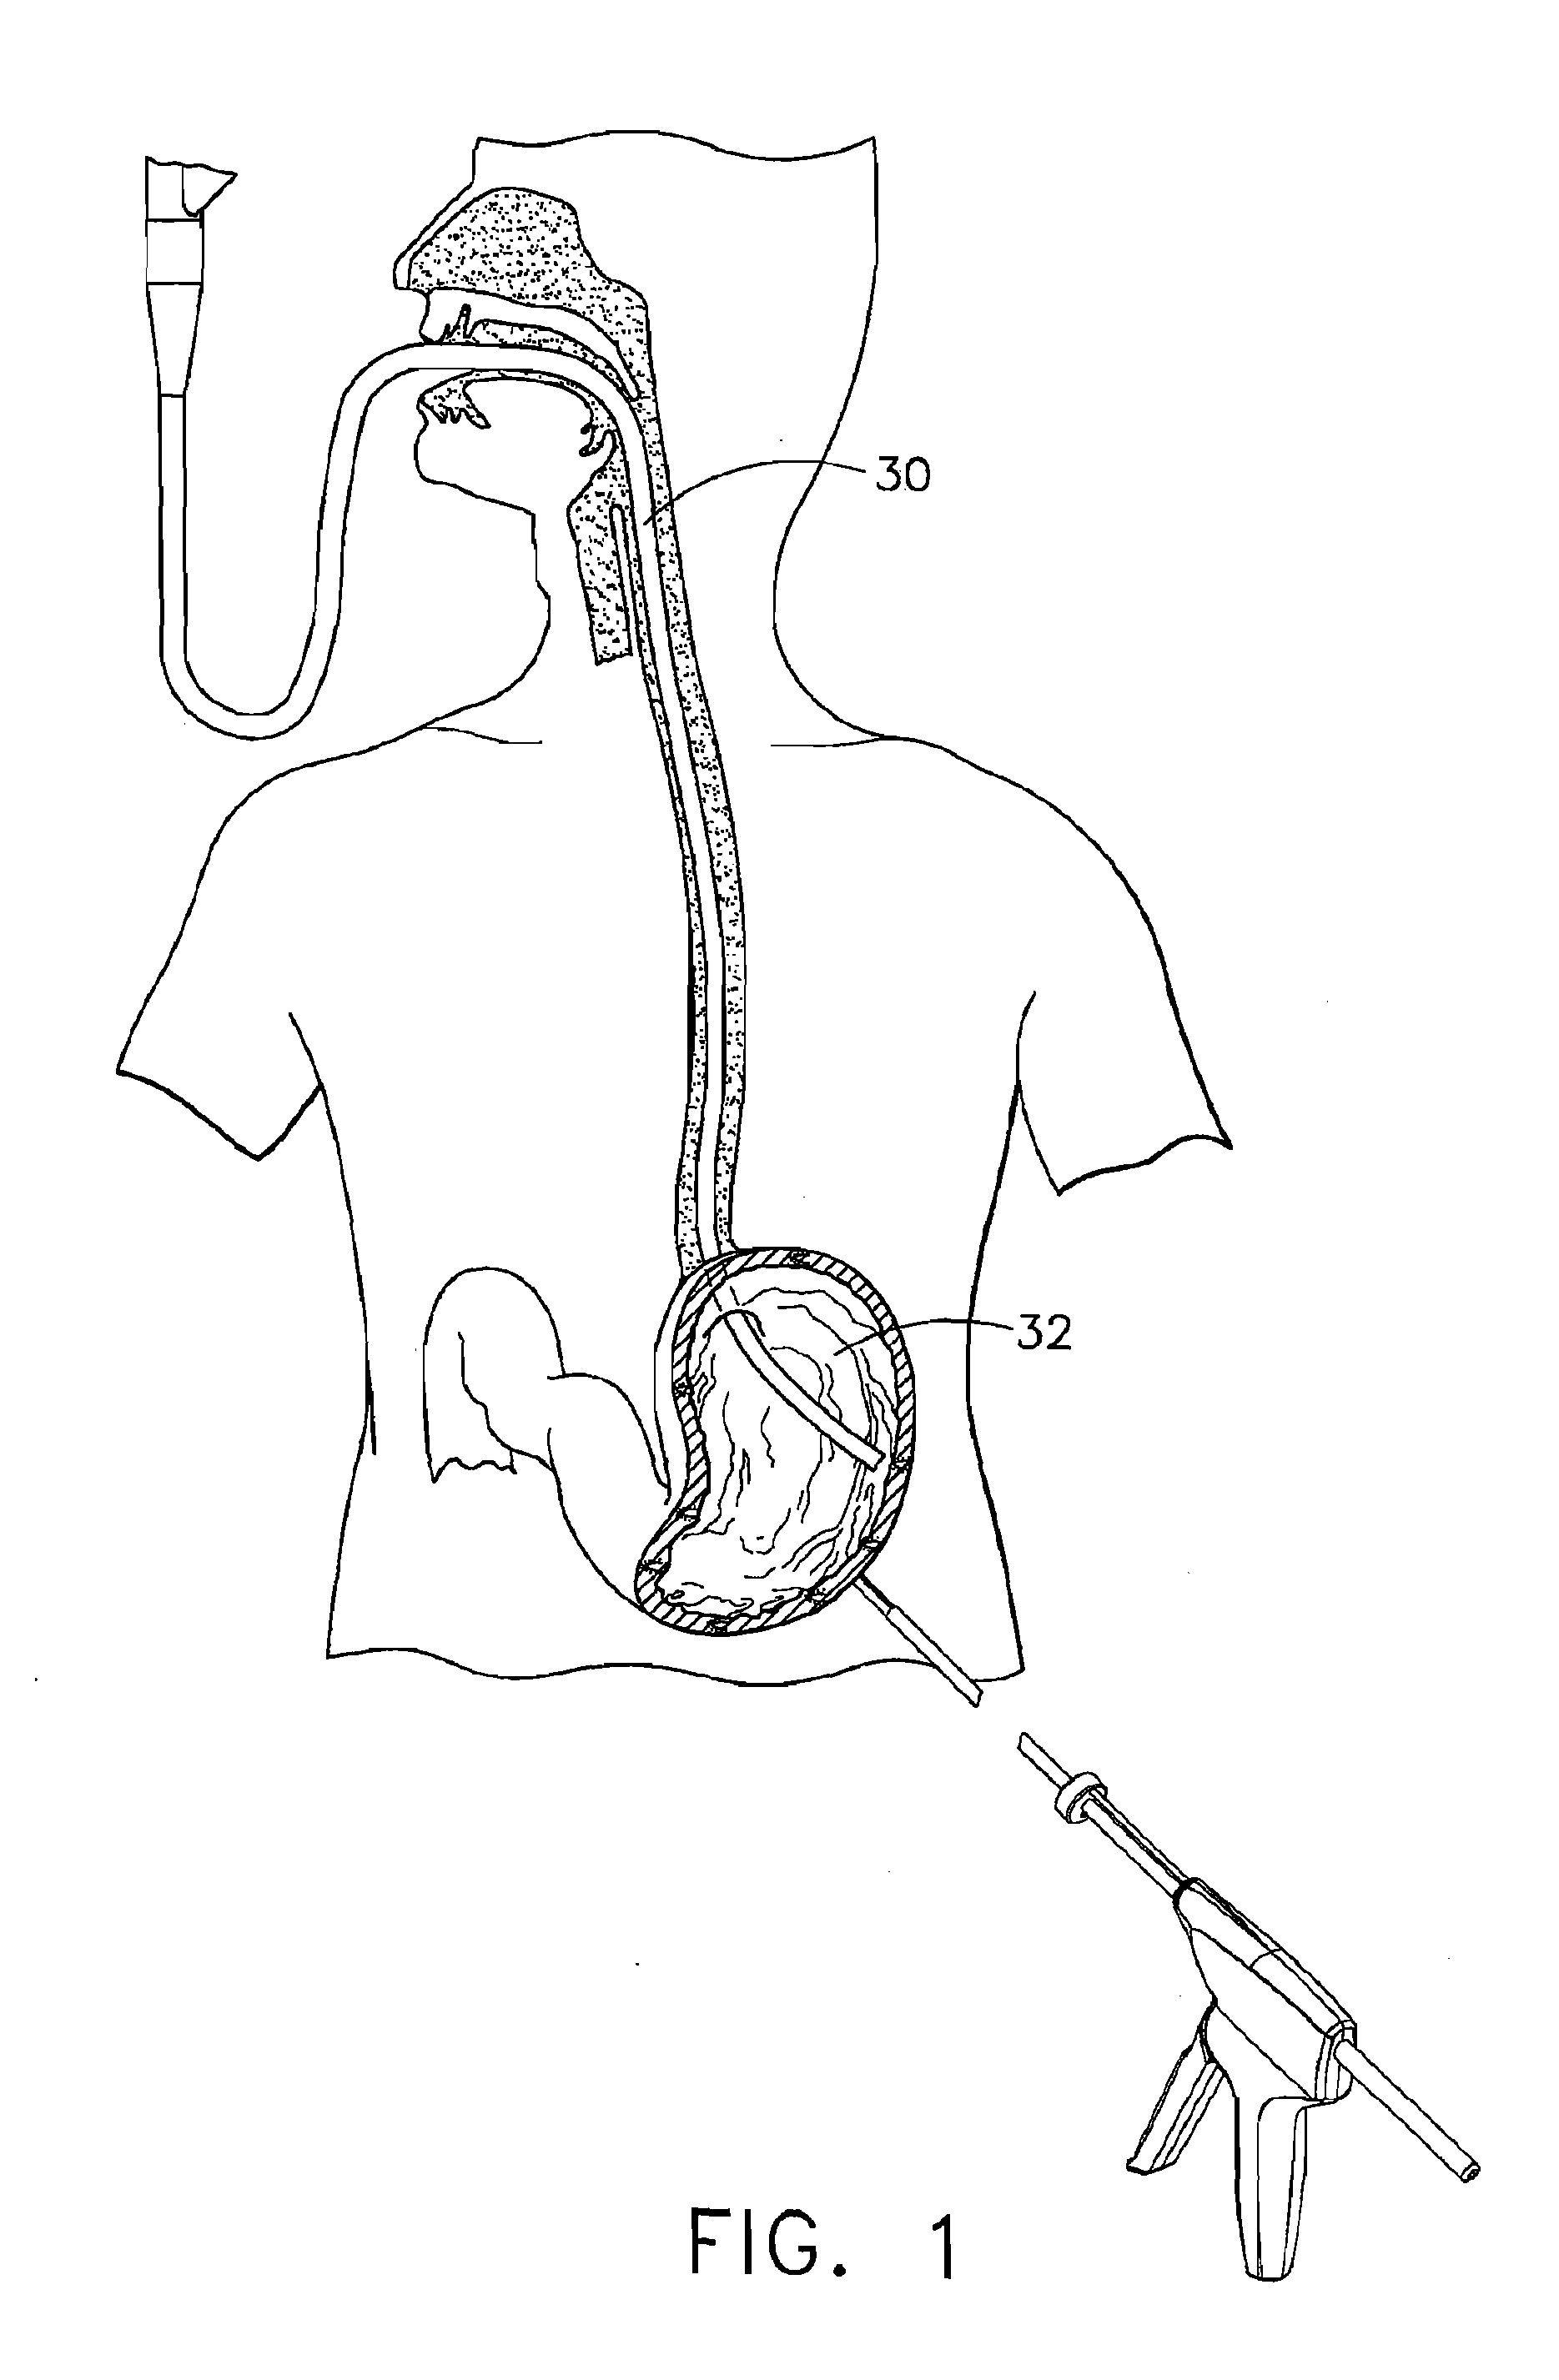 Method of insufflating the interior of a gastric cavity of a patient.